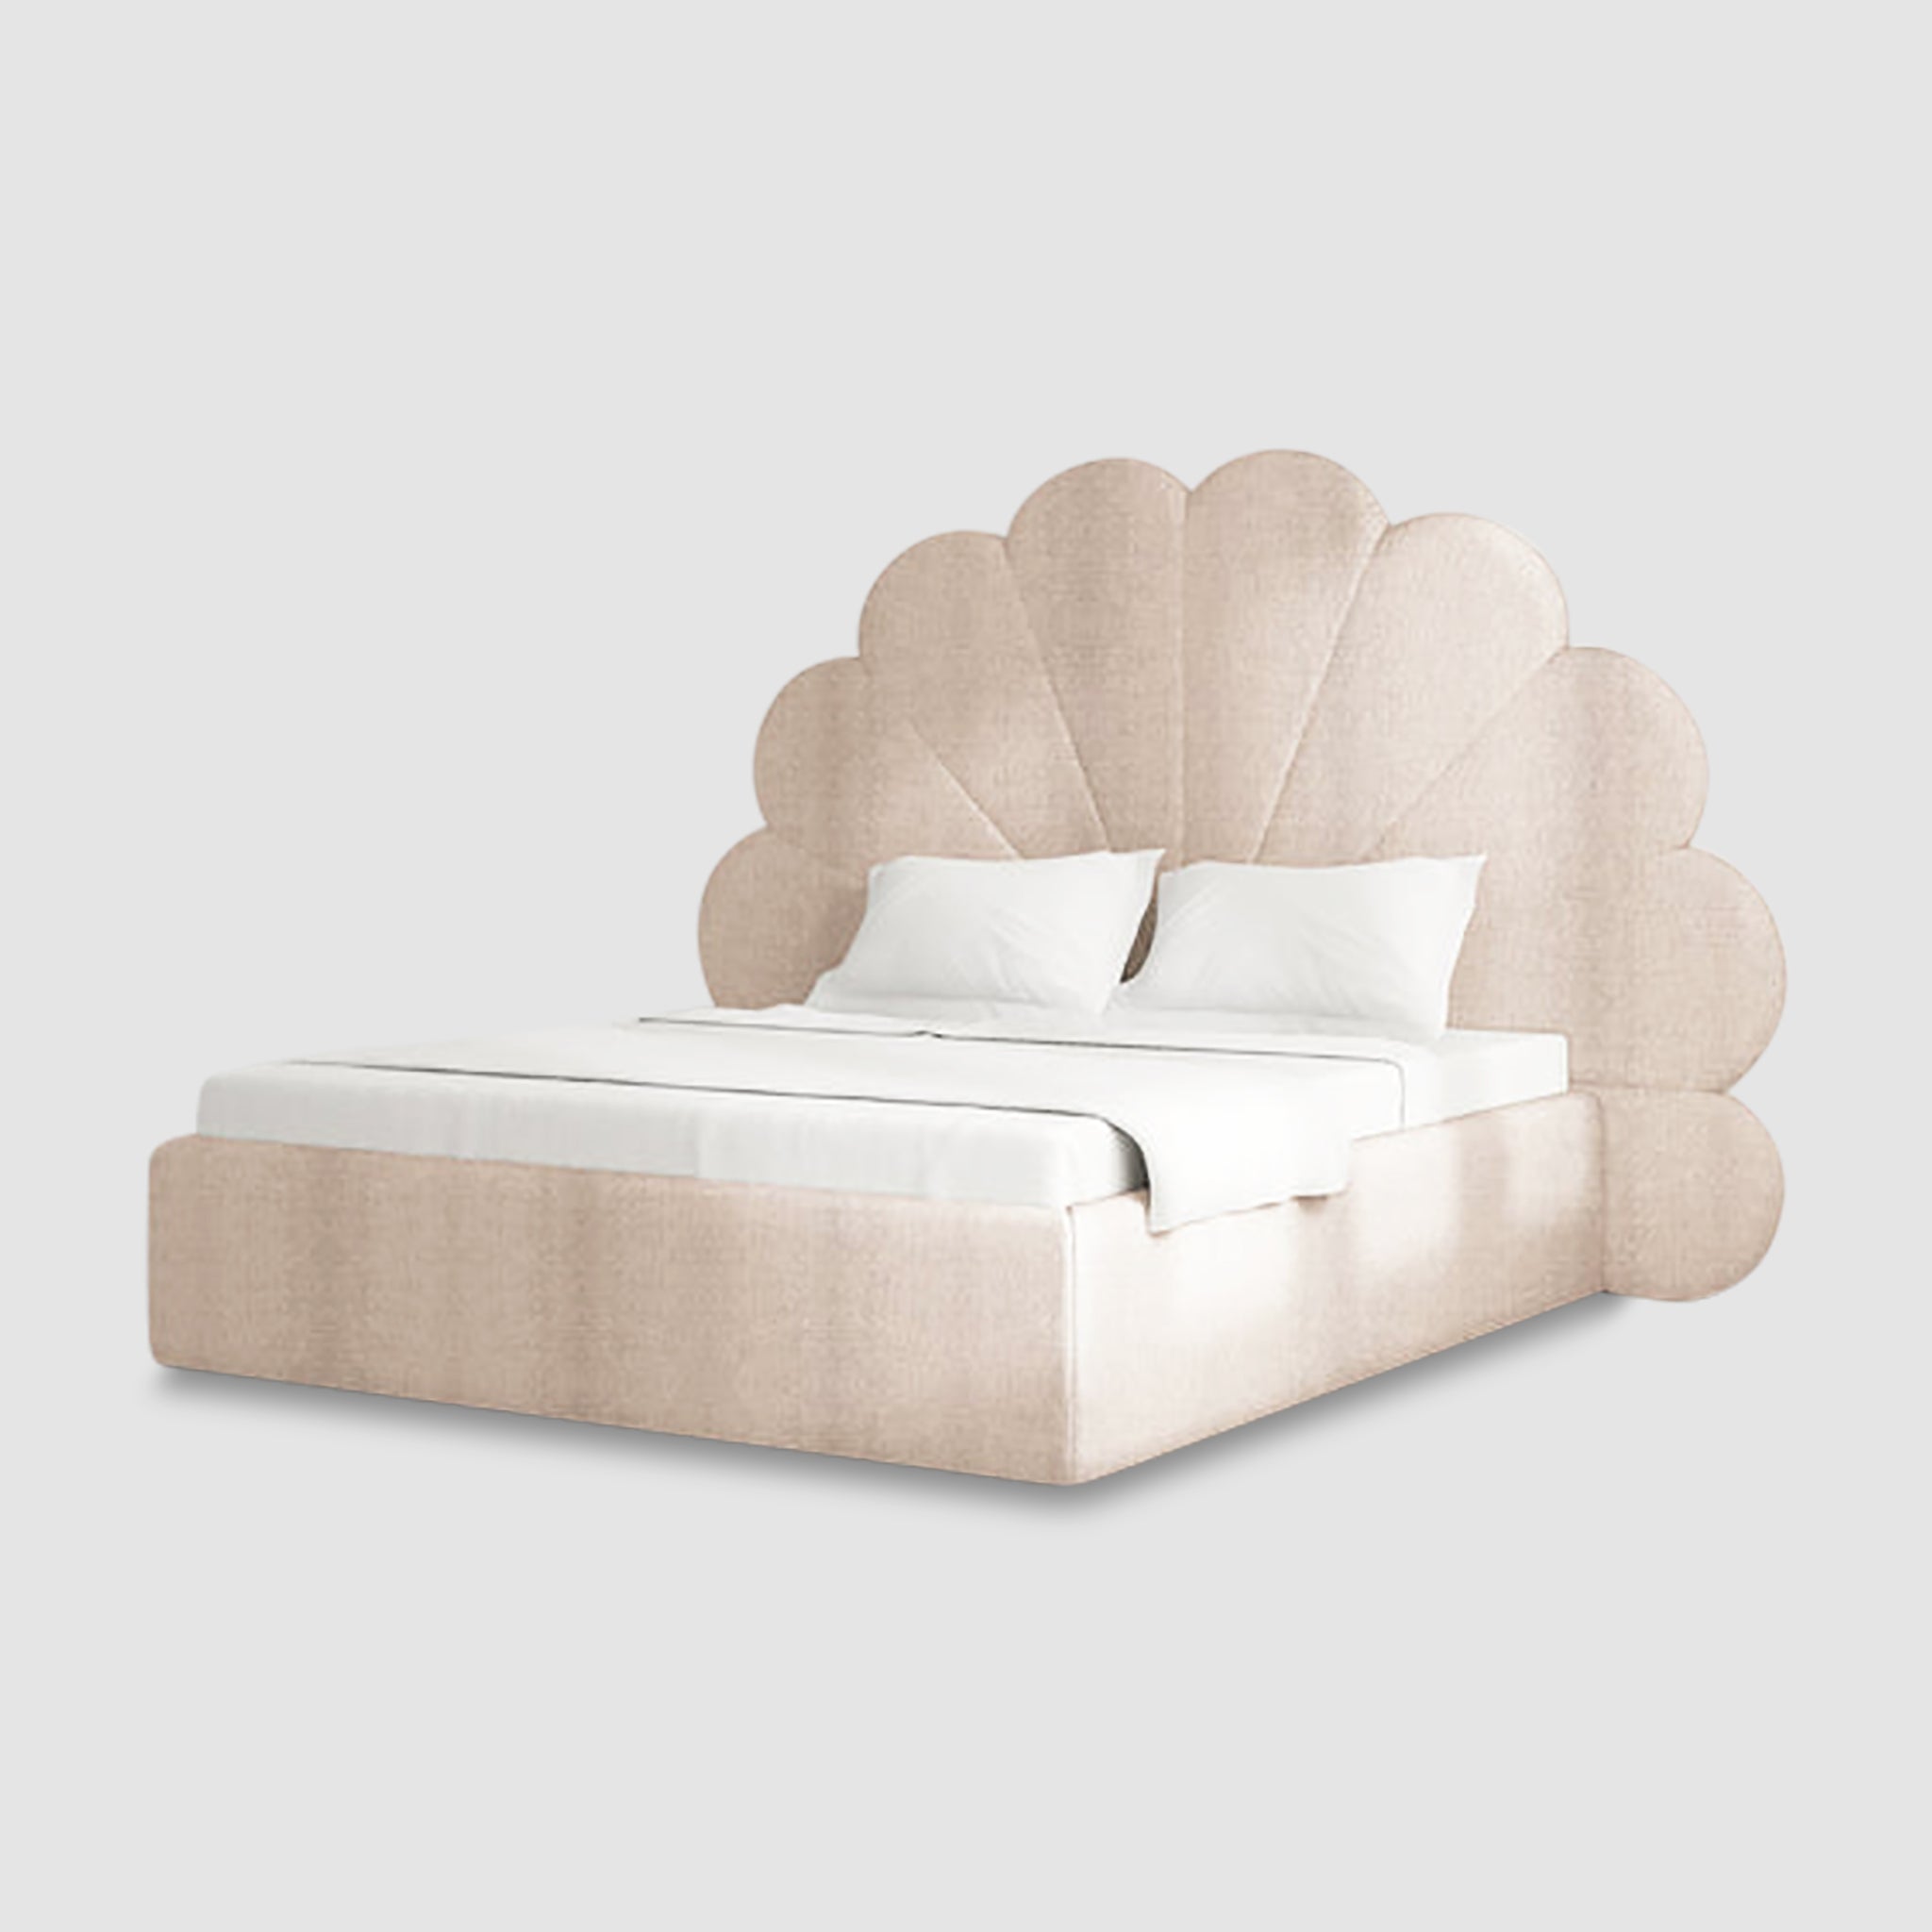 The Kyle Bed for restful nights and stylish decor